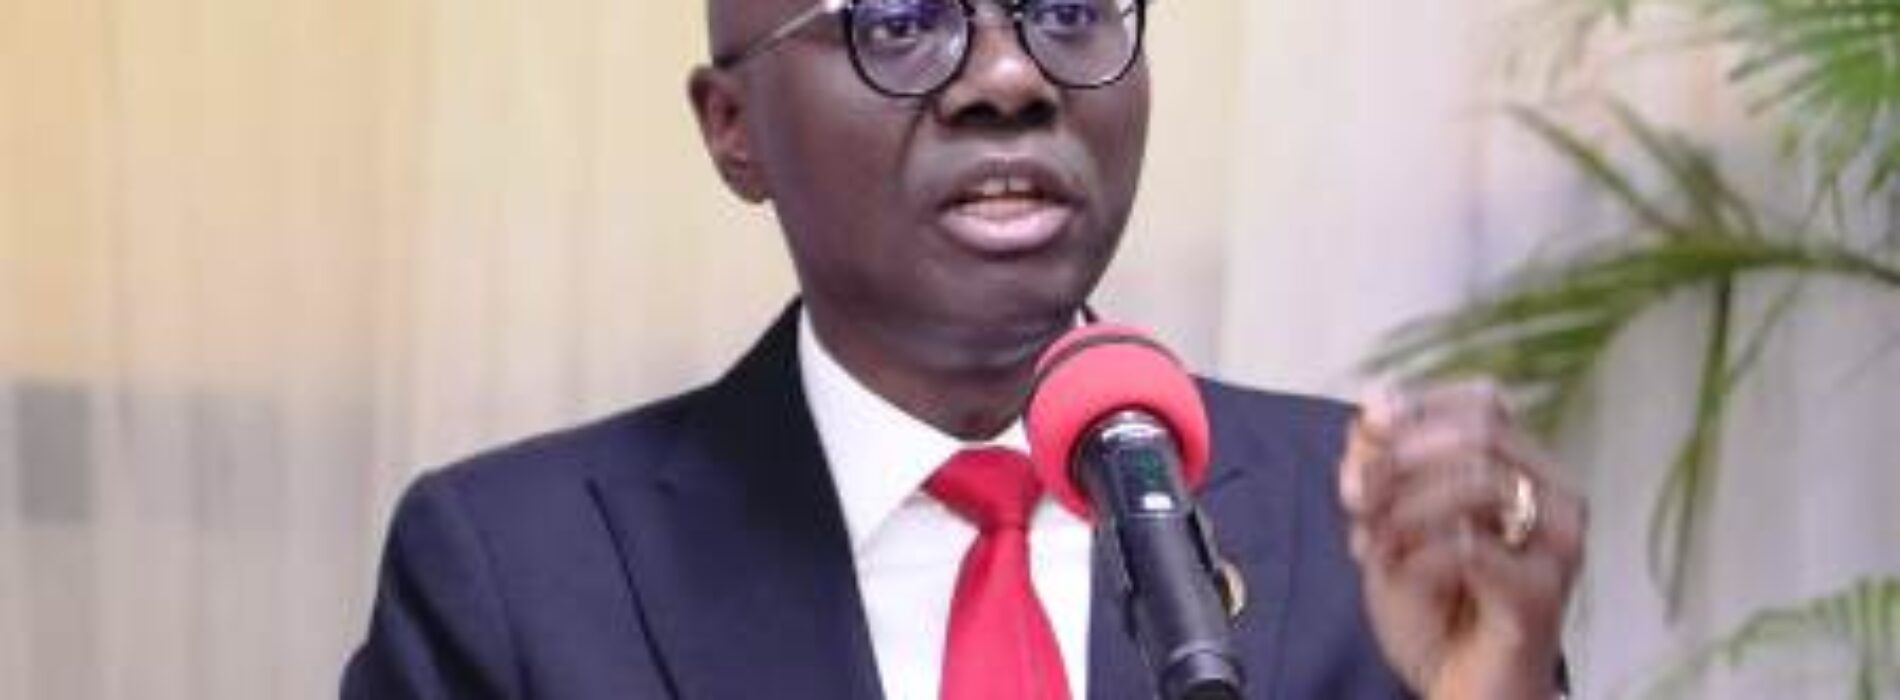 Mental Health: 1 in 4 Lagosians struggles with clinically diagnosable mood disorders – Sanwo-Olu